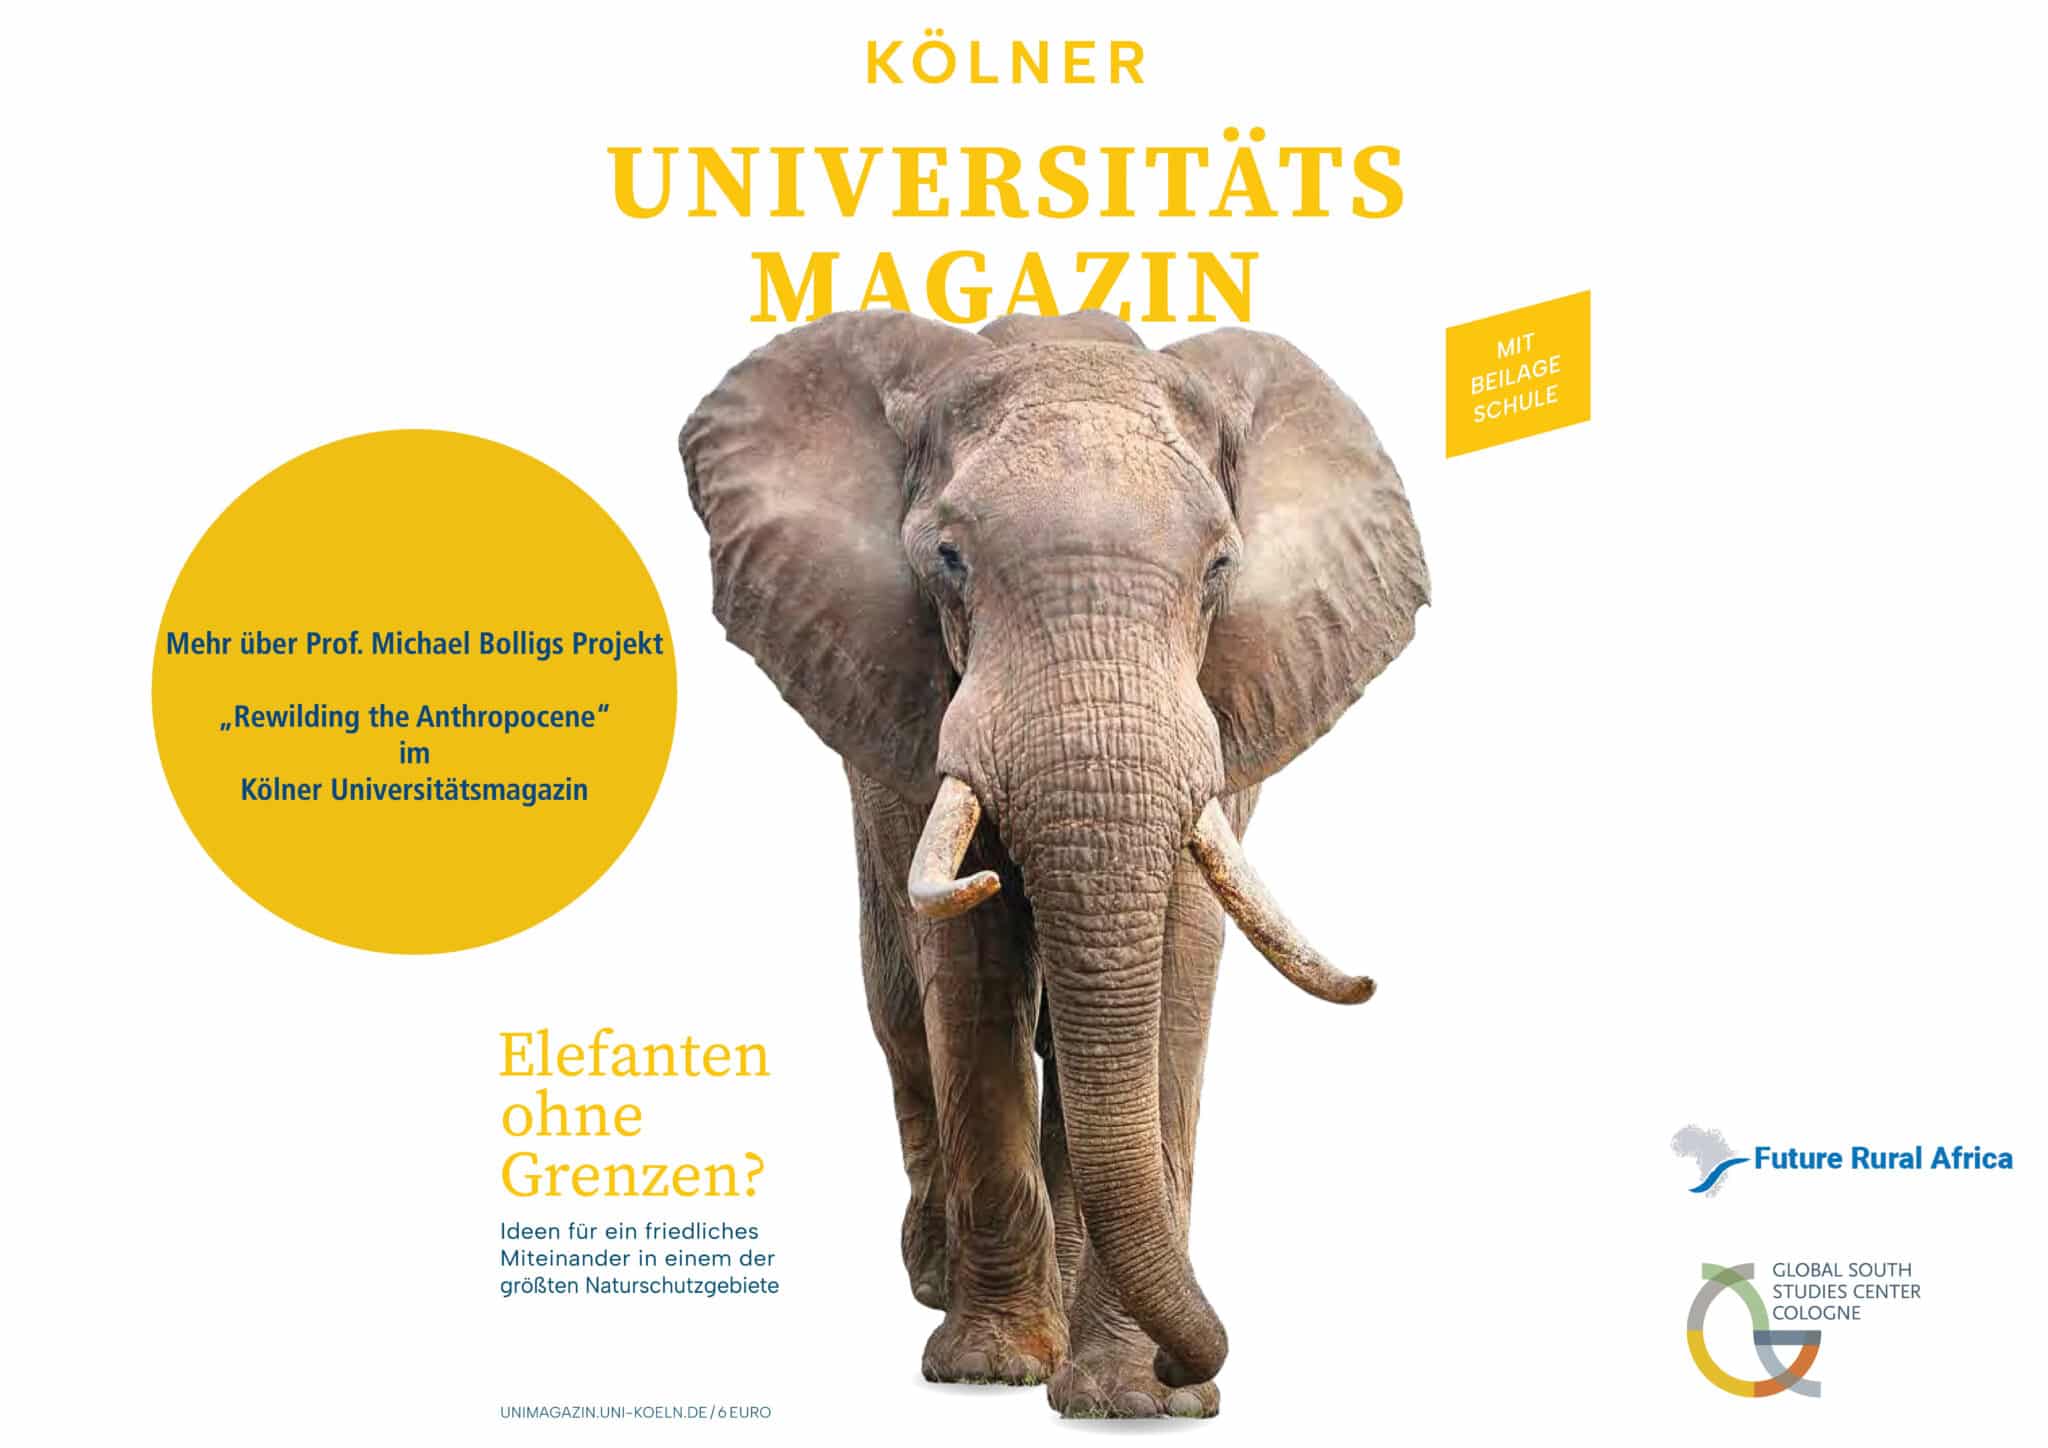 Cover of the university of cologne magazine depicting an elephant